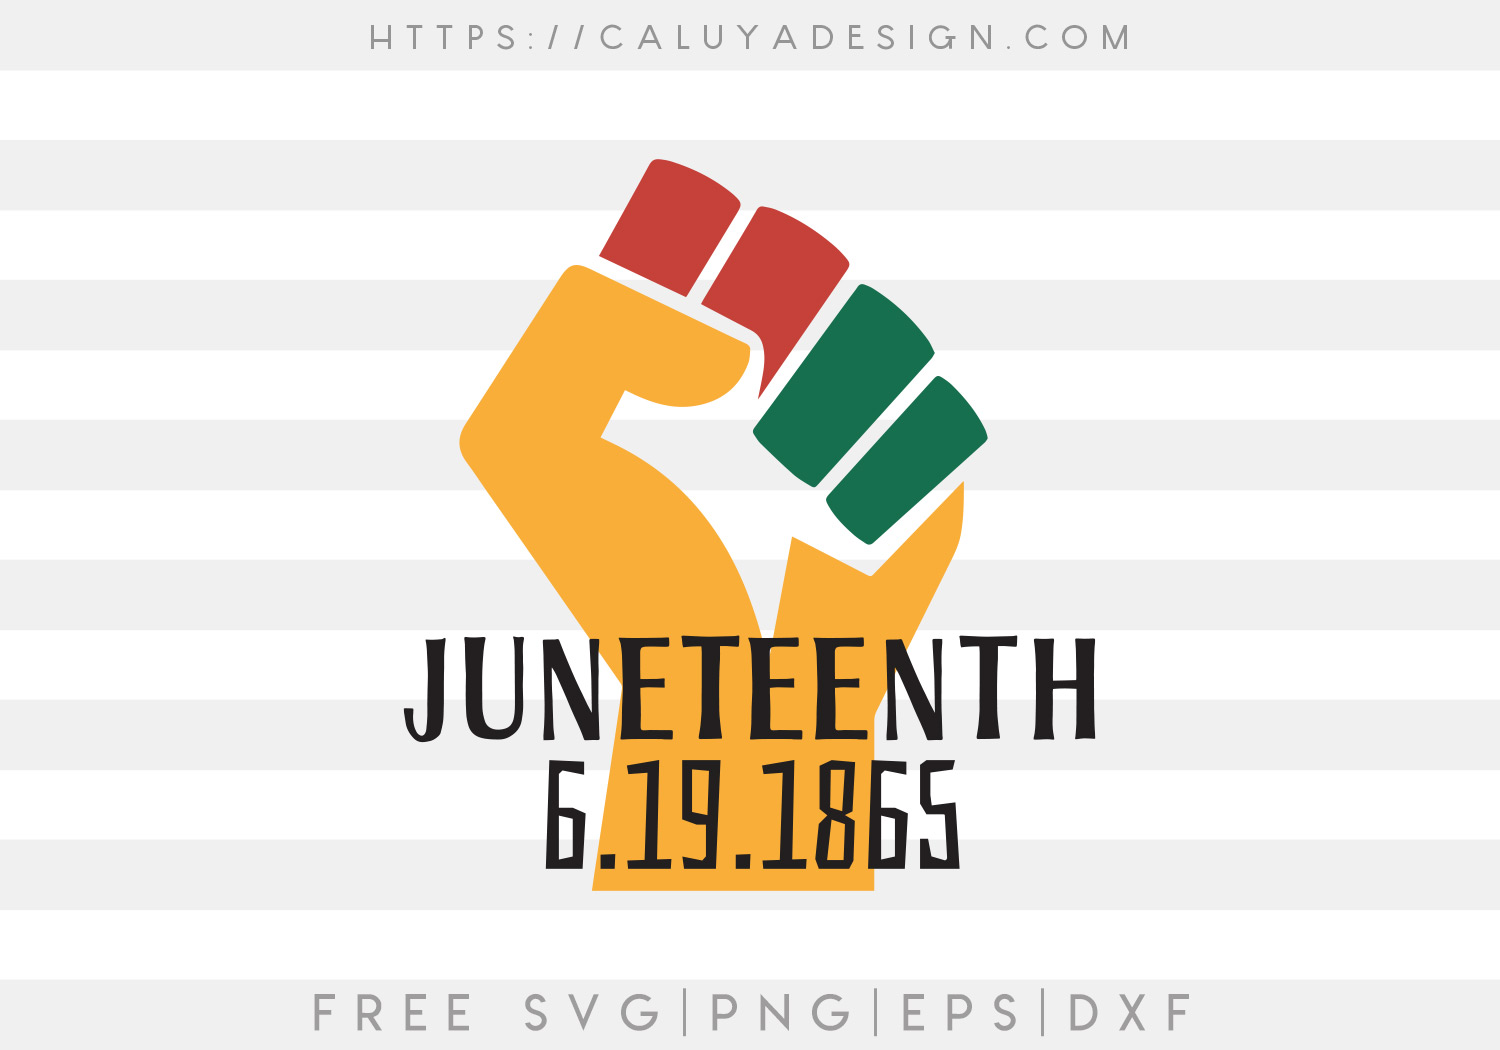 Download Free Juneteenth Svg Png Eps Dxf By Caluya Design